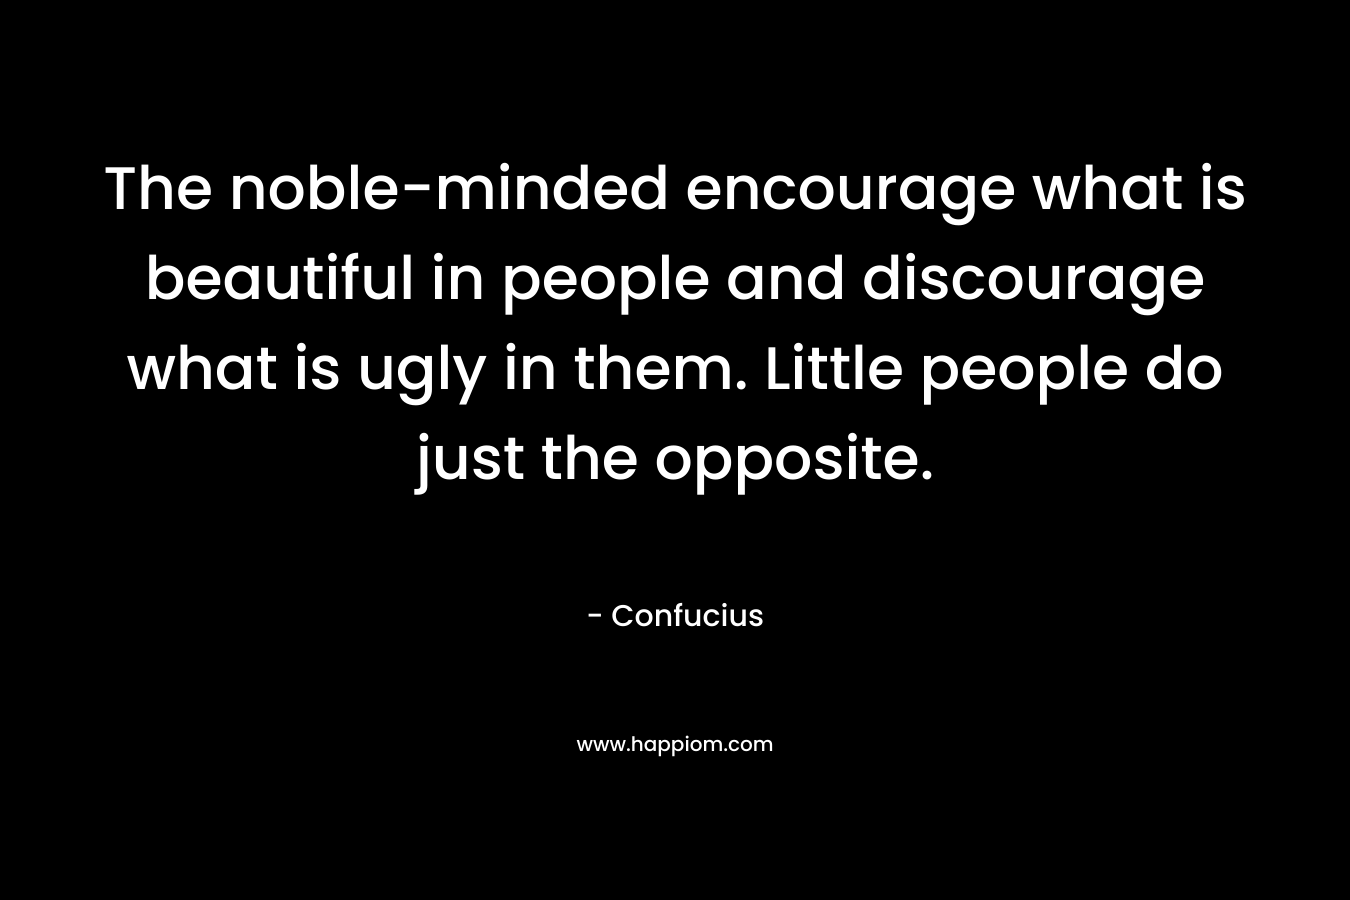 The noble-minded encourage what is beautiful in people and discourage what is ugly in them. Little people do just the opposite. – Confucius